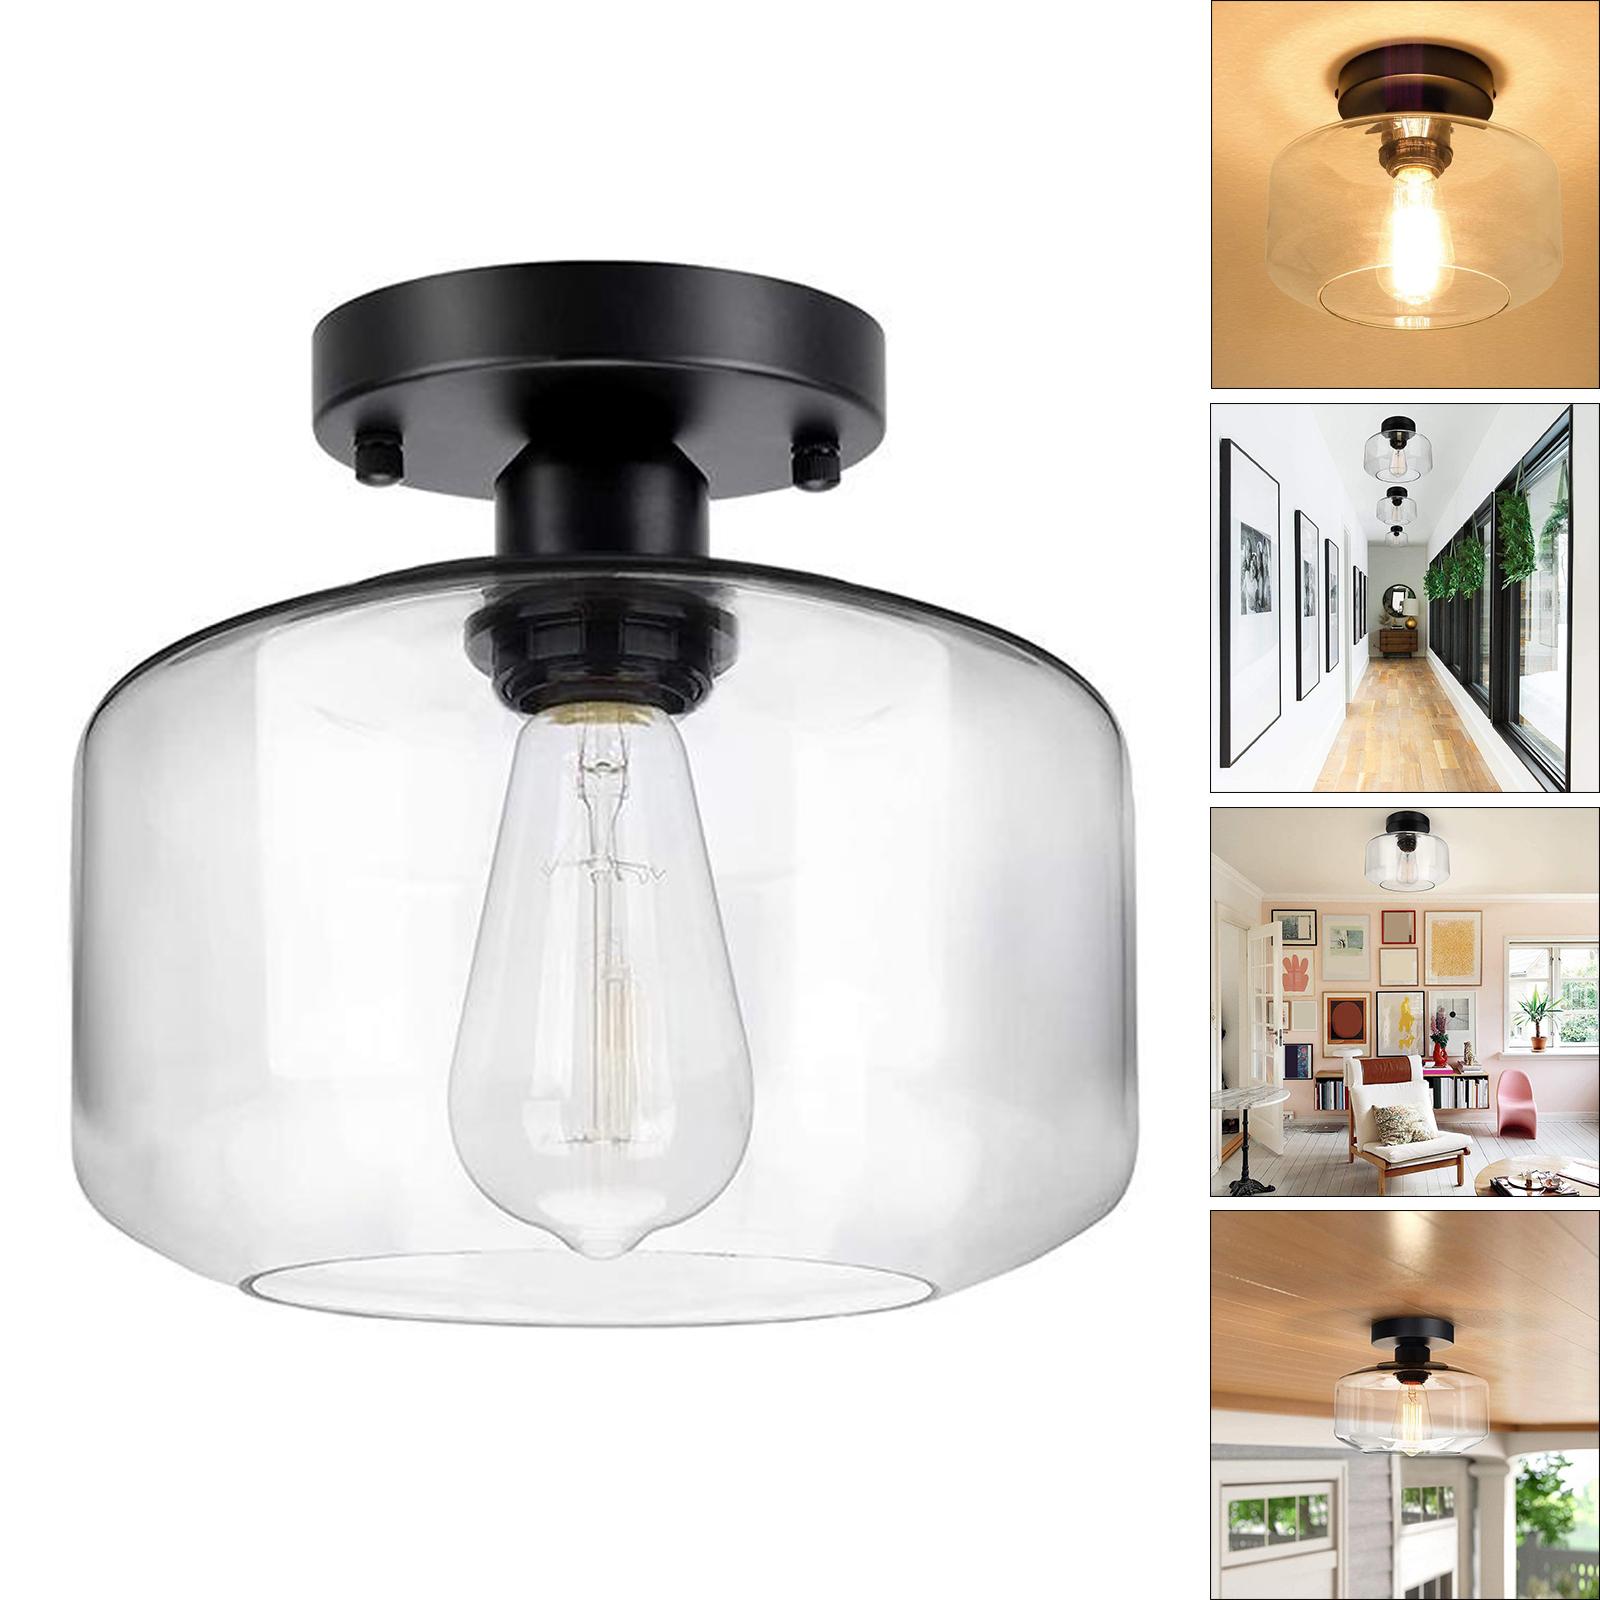 Industrial Ceiling Light Fixture with Clear Glass Shade, Semi Flush Mount Ceiling Light for Hallway, Entryway, Cafe, Bar, Corridor, Porch,Passway